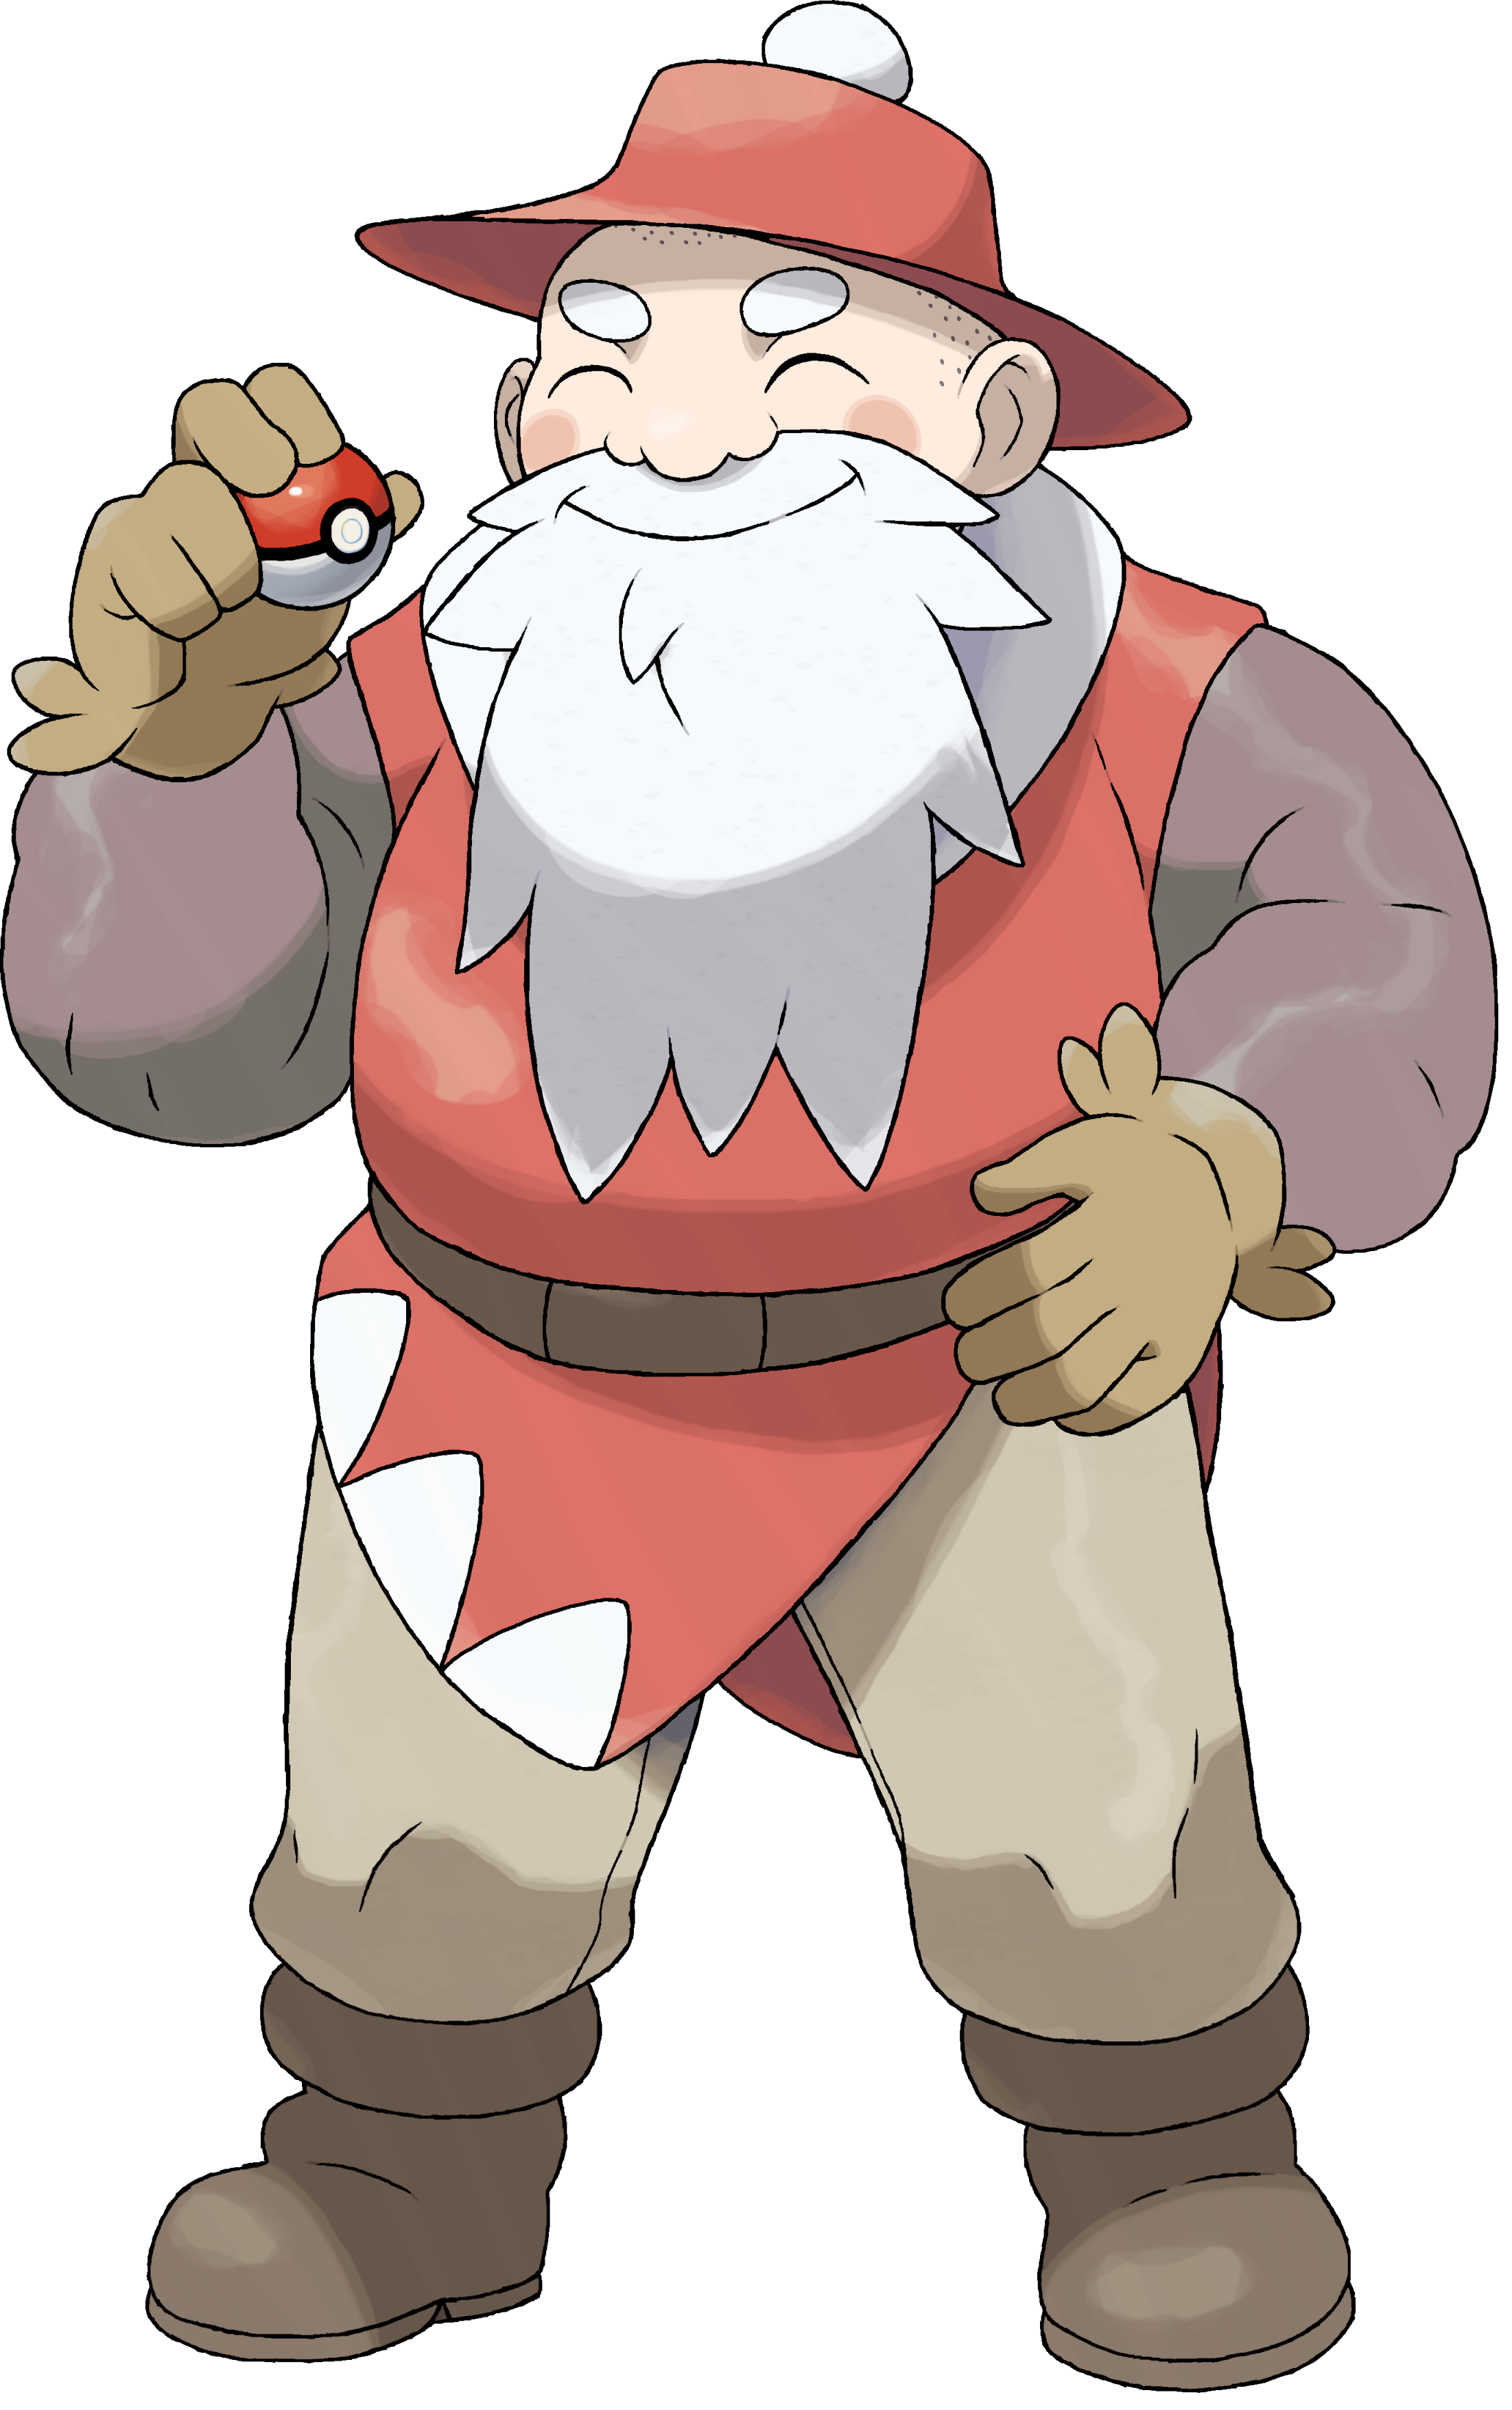 Gym leaders capx wiki. Leader clipart main character